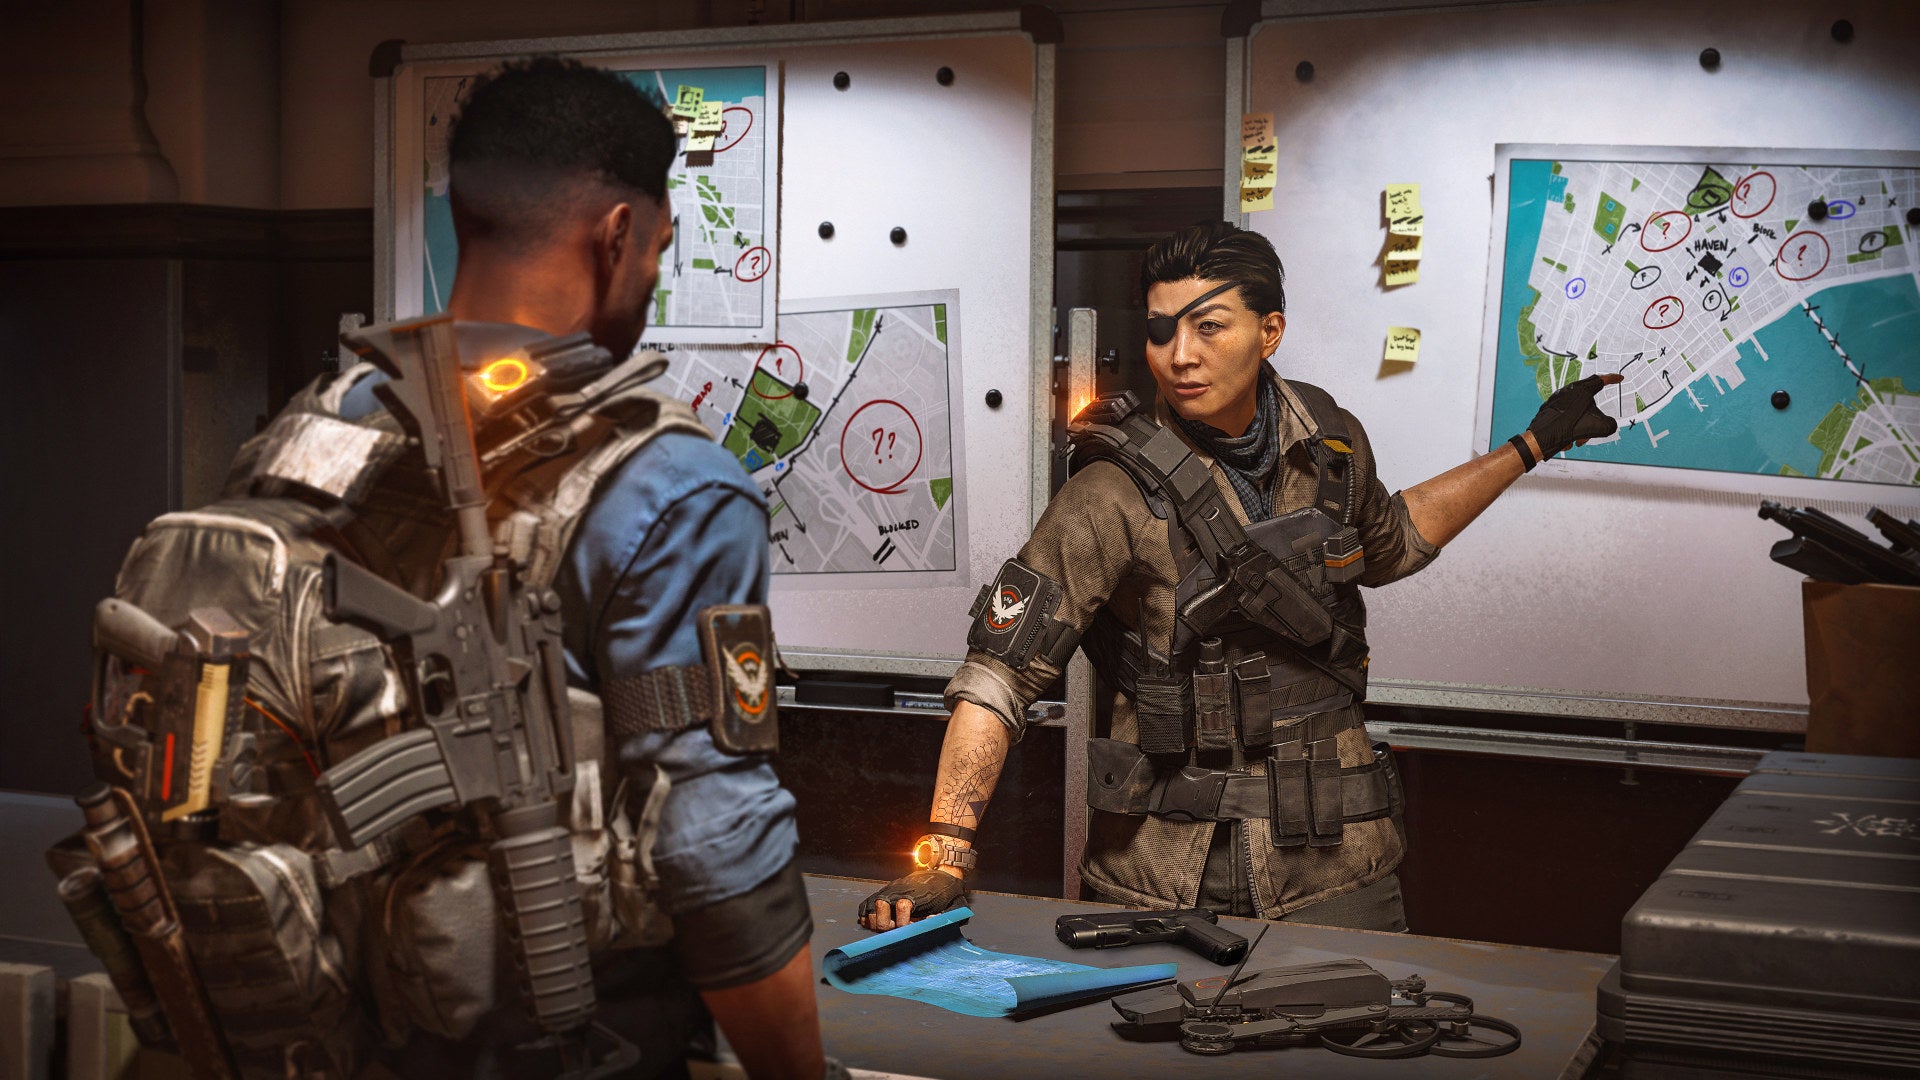 Three years later, The Division 2 is heading to Steam